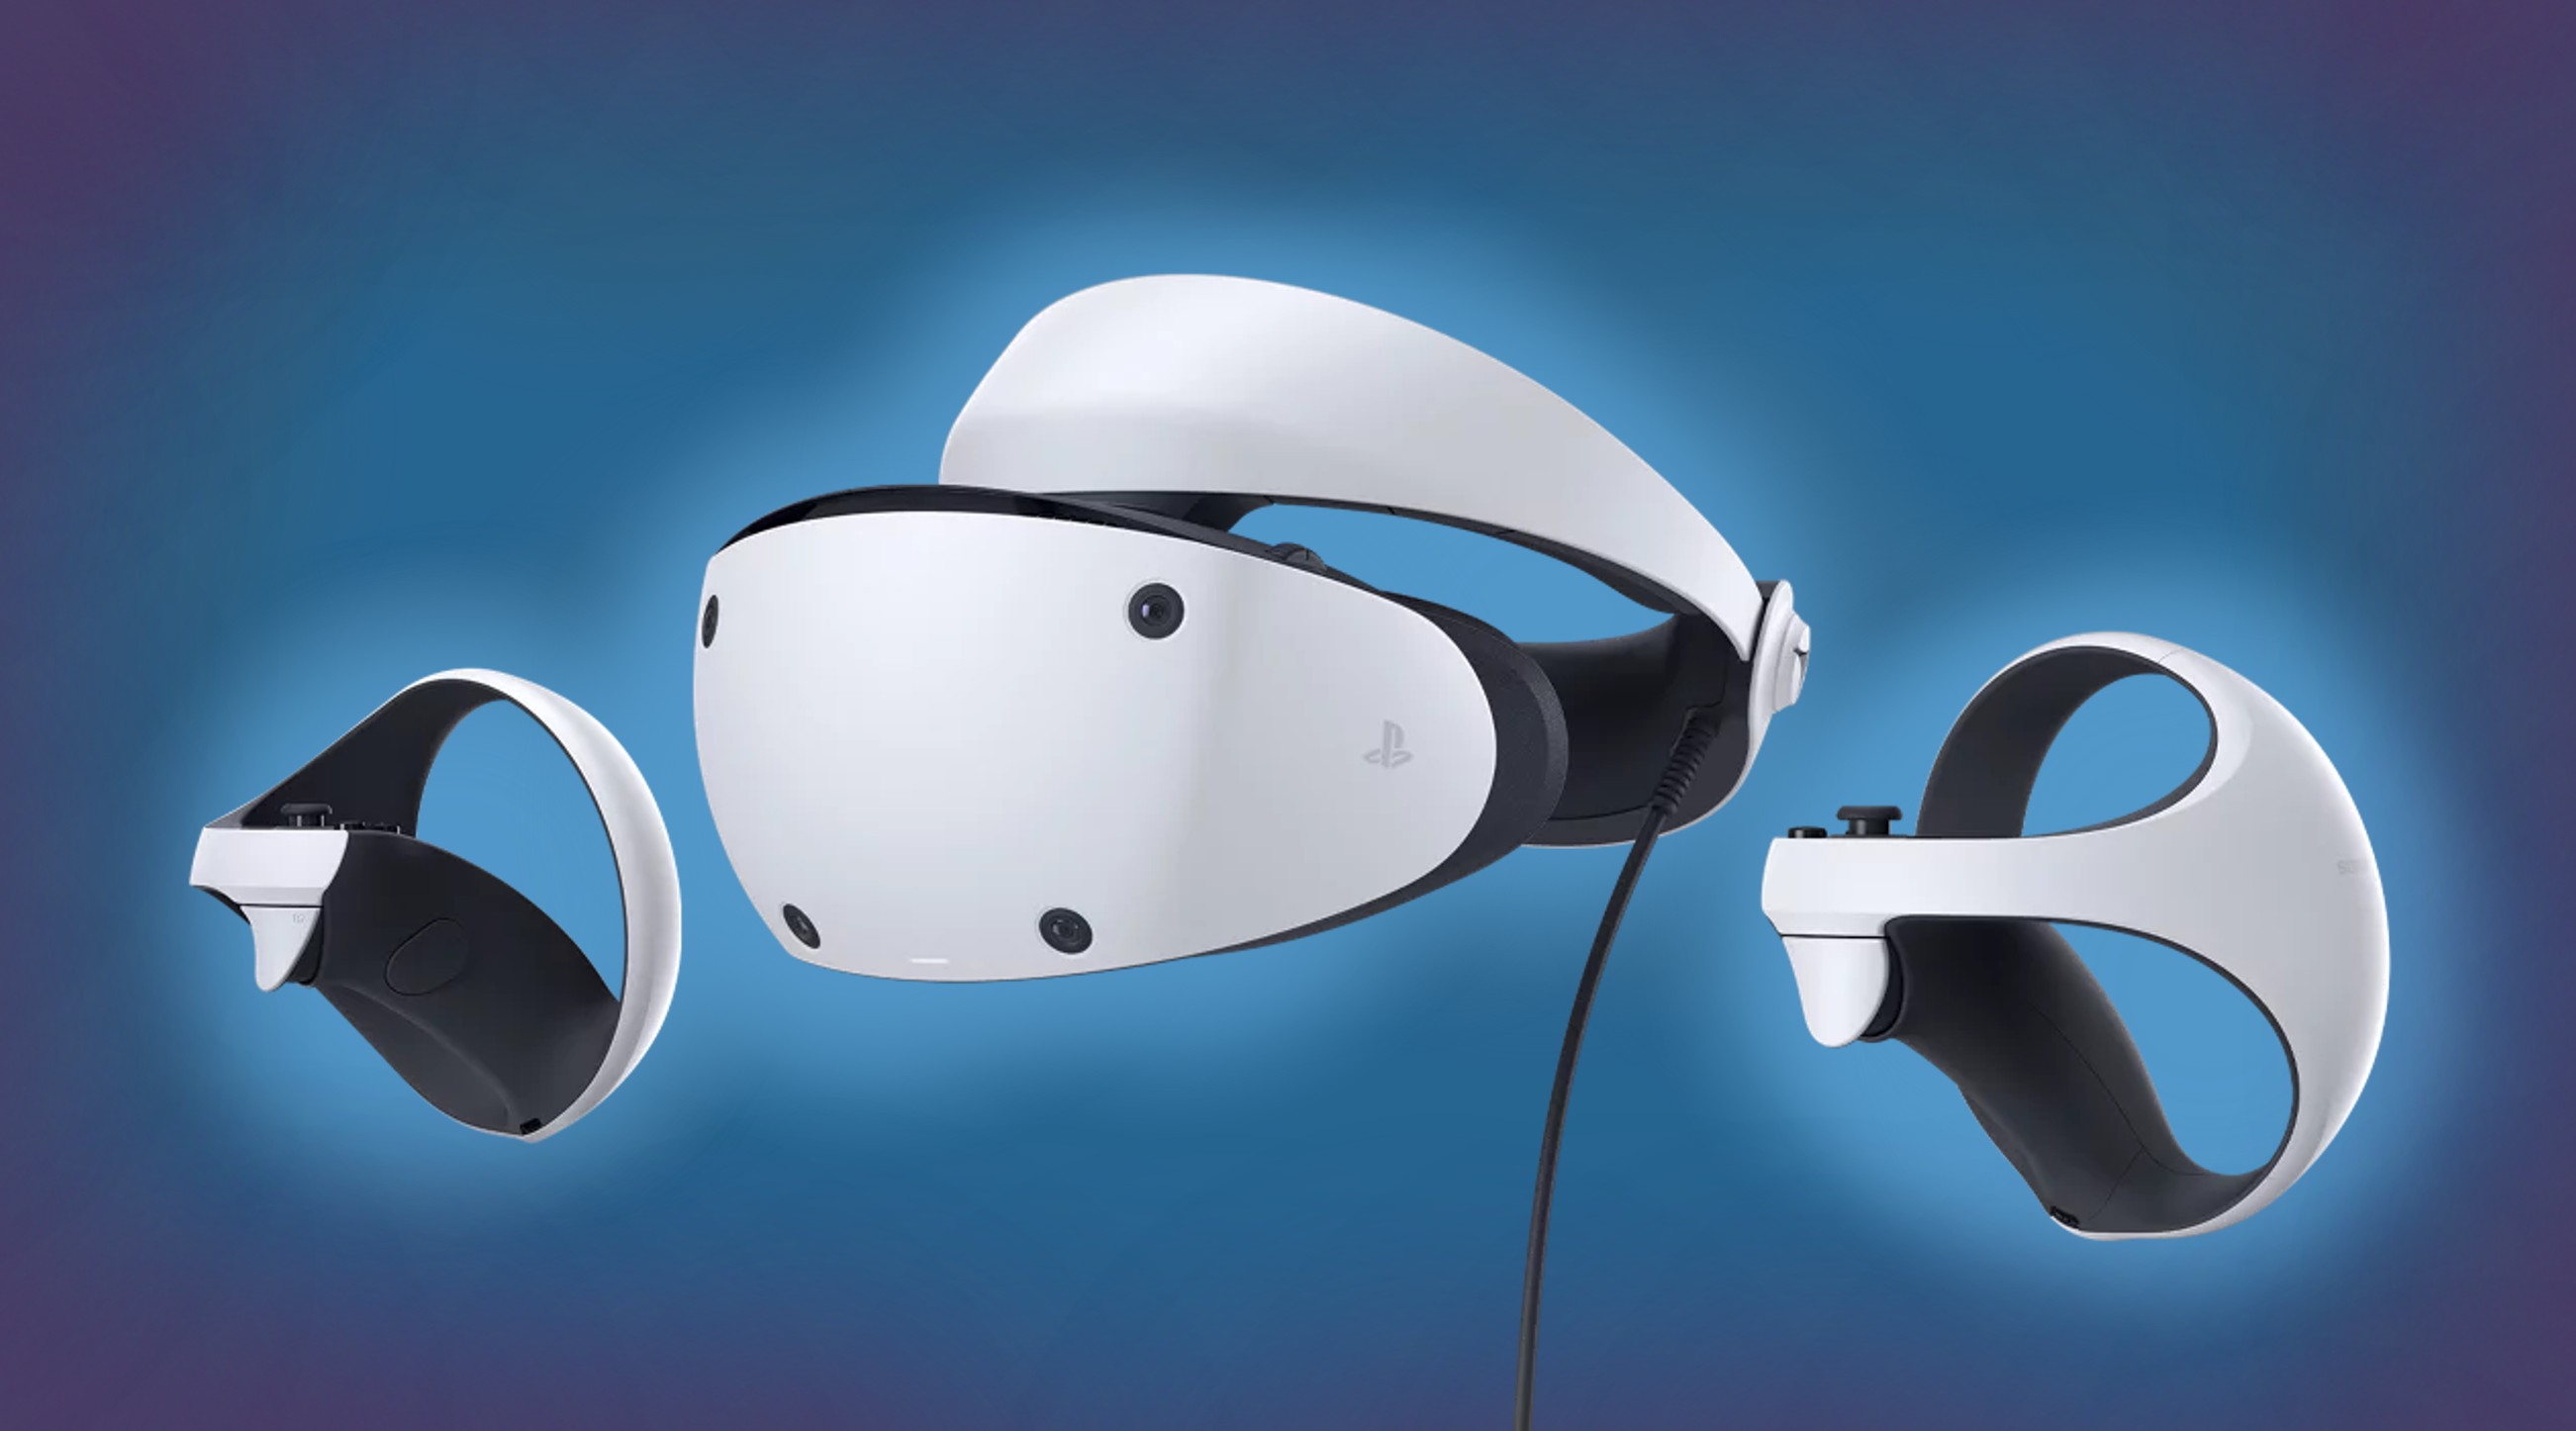 Sony unveils the PlayStation VR 2, giving a first look at the new